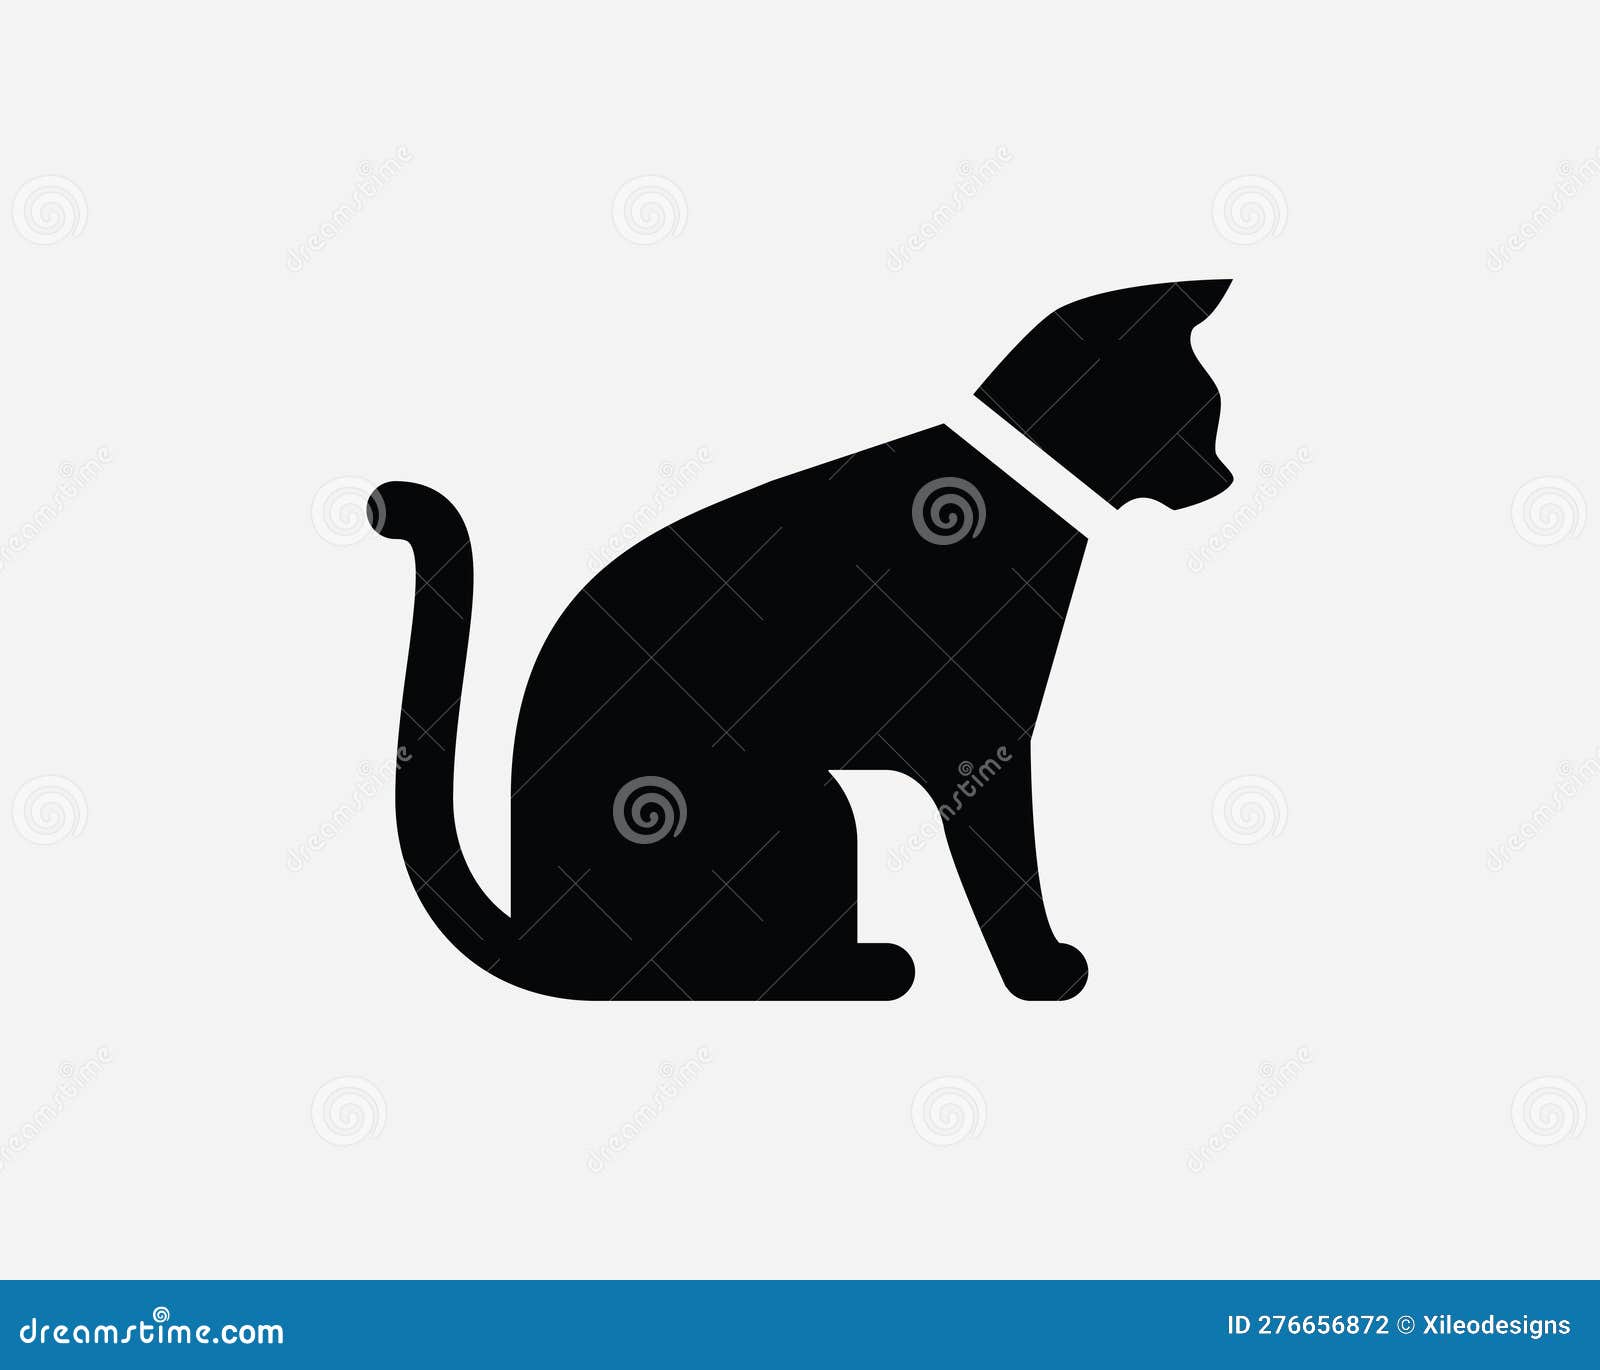 cat silhouette icon. kitten feline pet whole body side profile sit sitting character  tail colar  sign  clipart